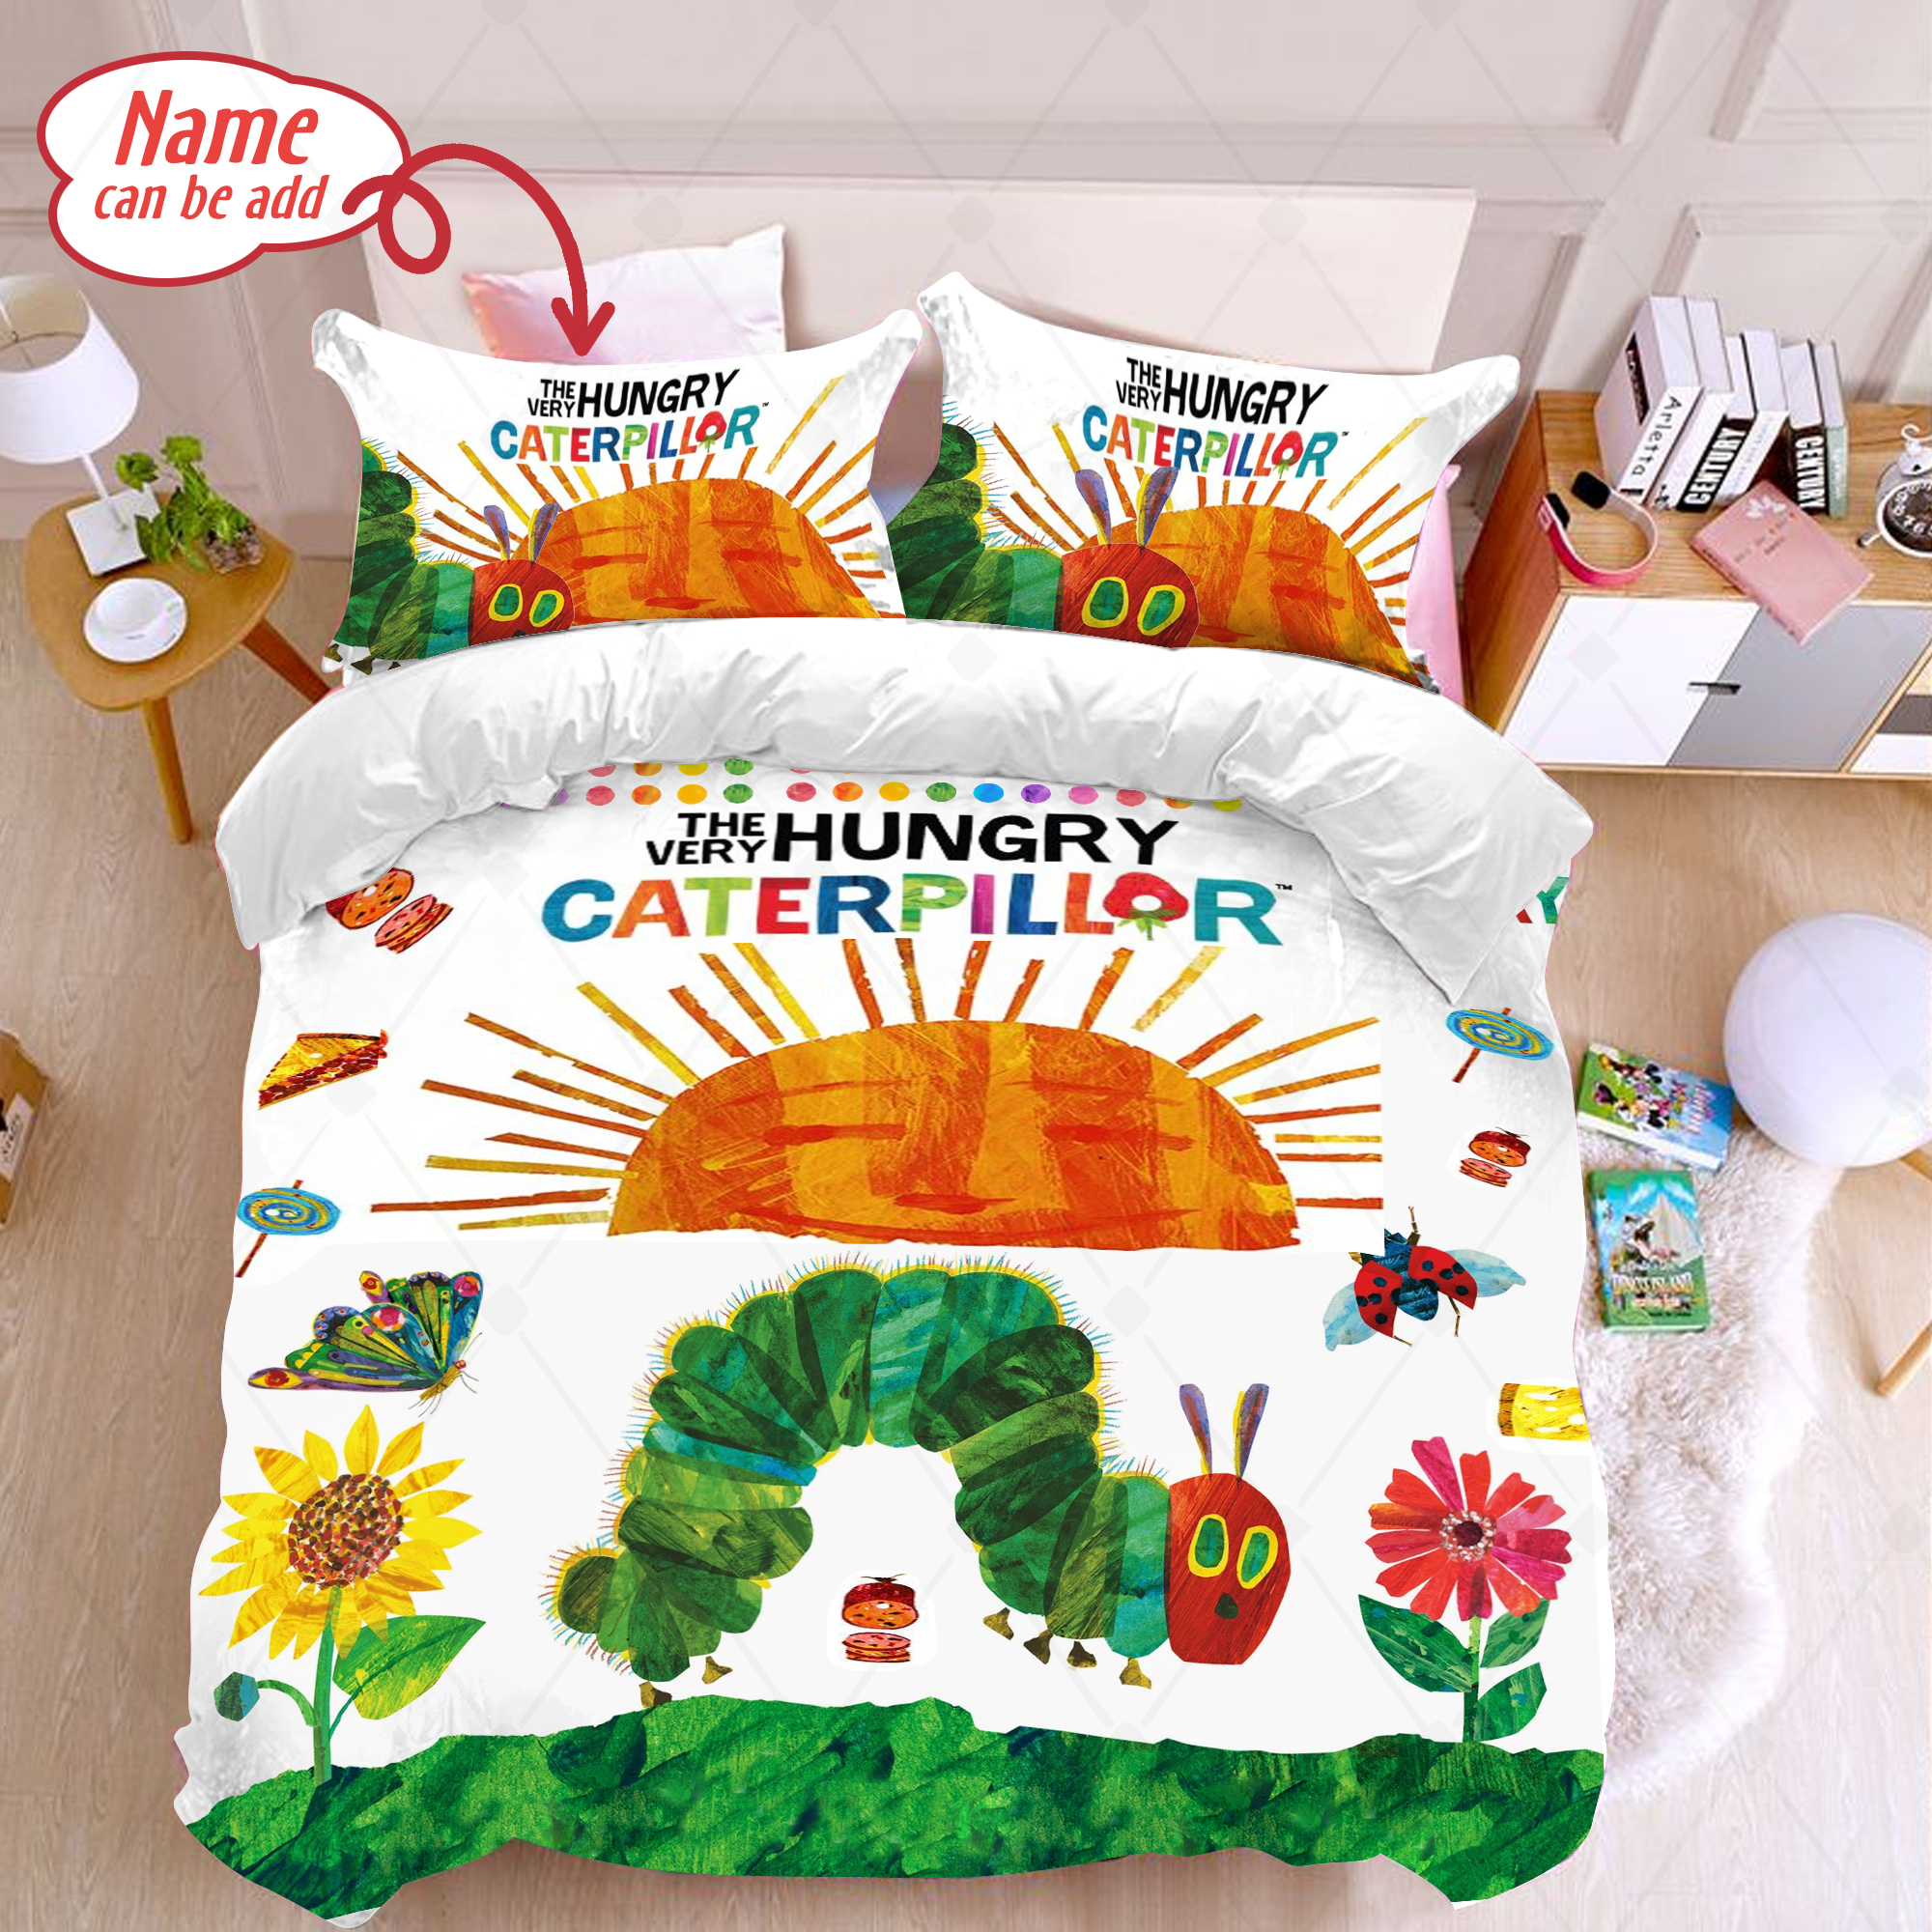 Personalized The Very Hungry Caterpillar Duvet Cover Bedding Set And Pillowcase The Very Hungry Fleece Blaket Hungry Caterpillar Birthday Party